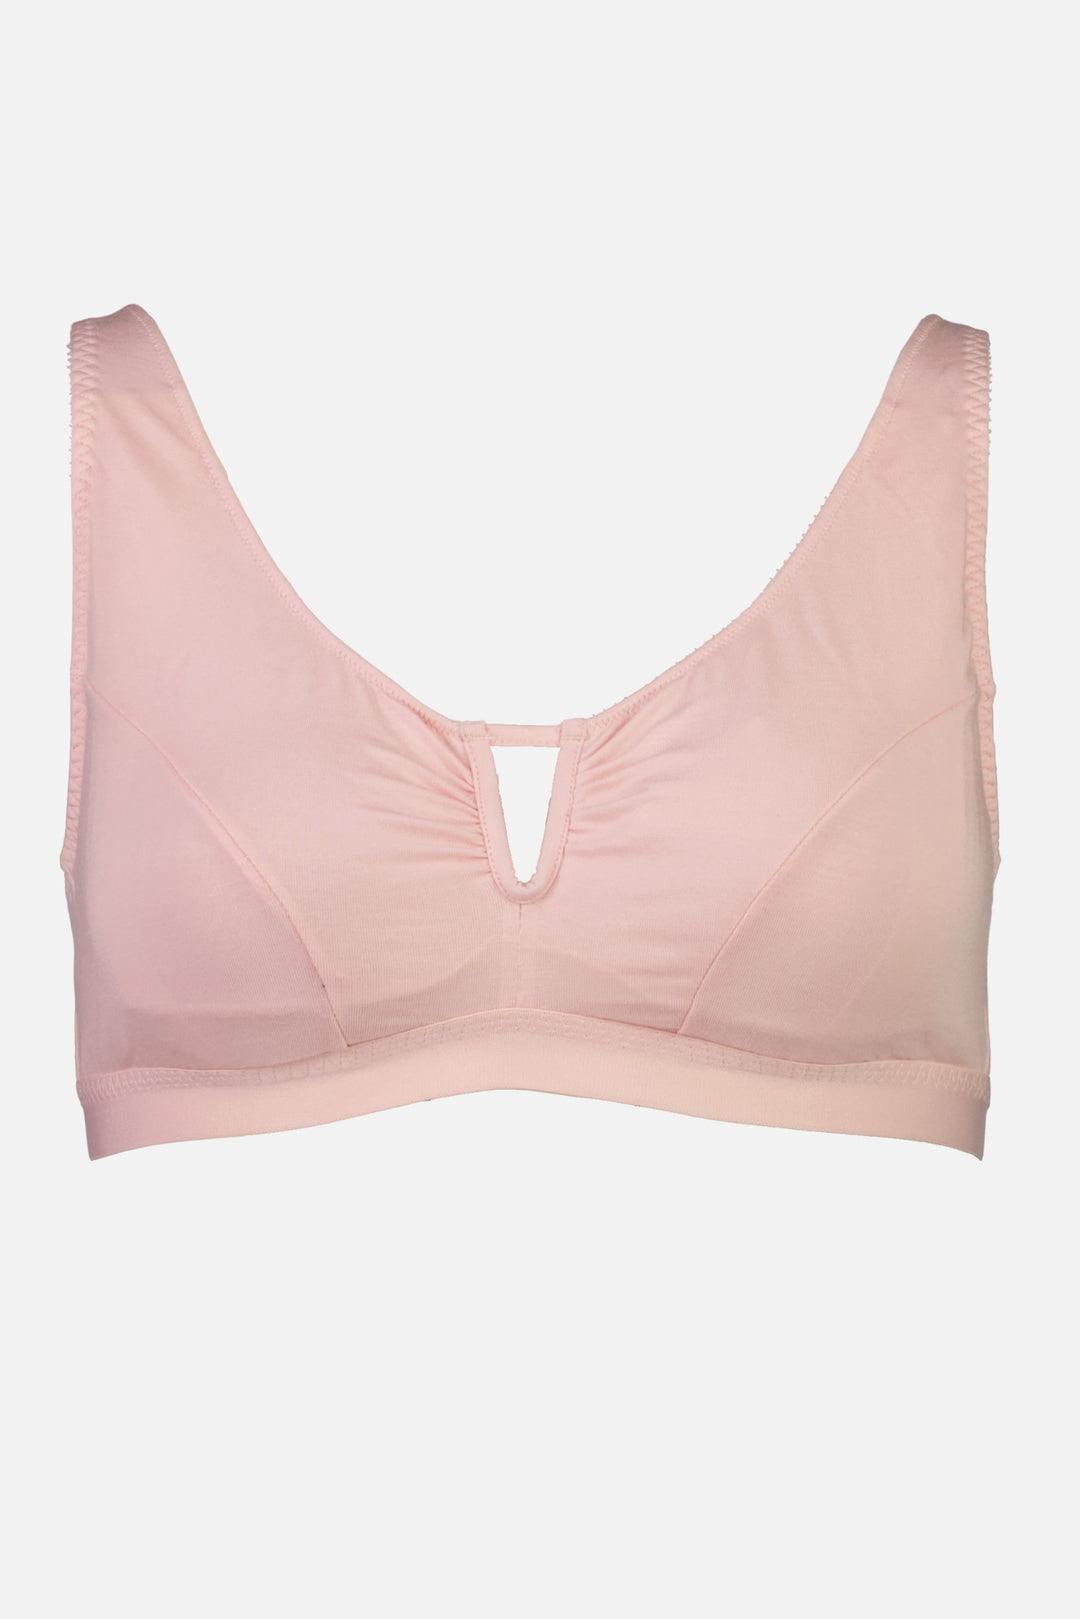 Videris Lingere Rachel fuller cup soft cup bra in rosy pink sustainable soft Tencel